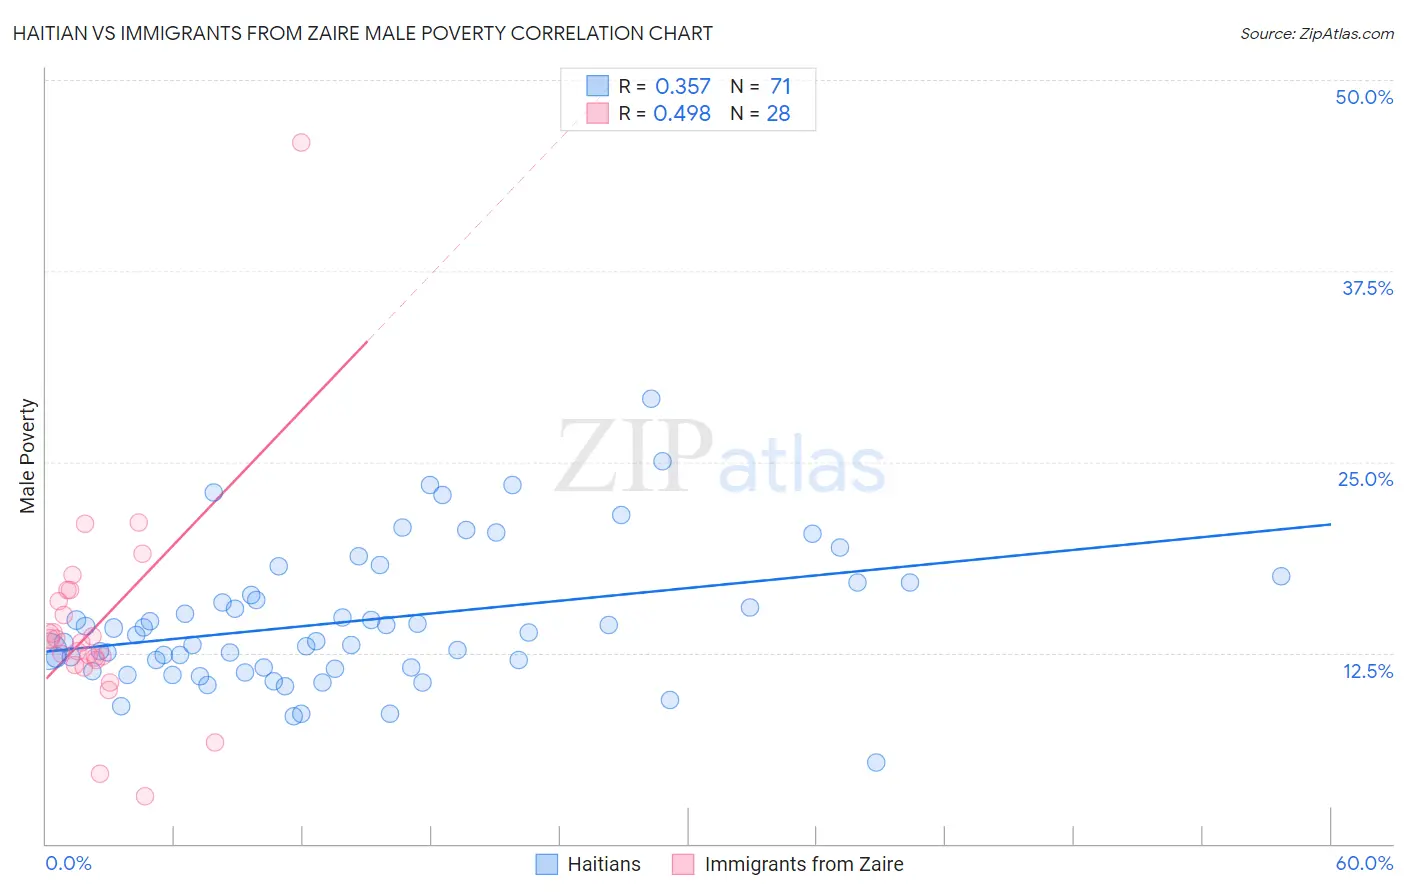 Haitian vs Immigrants from Zaire Male Poverty